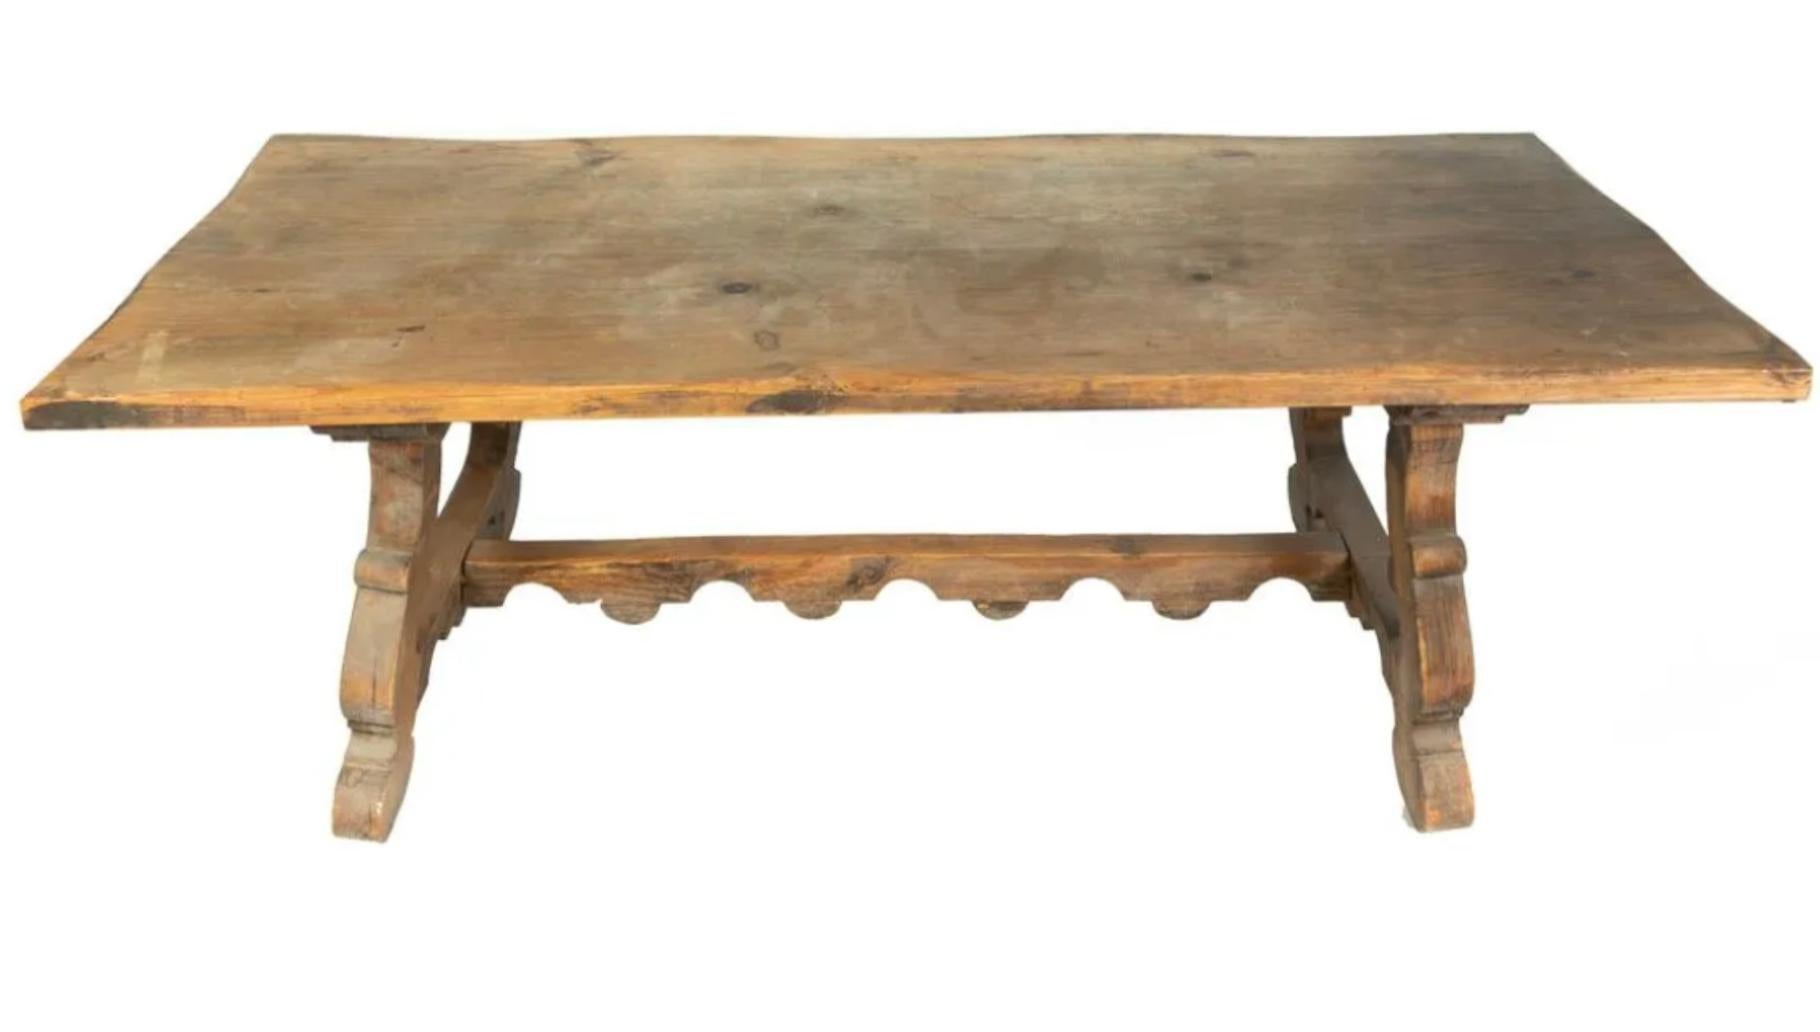 Early 20th century Rustic Spanish Colonial style Traditional dining table of lovely proportions. Years of use have given it a soft patina at the same time it is still in excellent condition and very sturdy. Wonderful in a large Kitchen or Dining